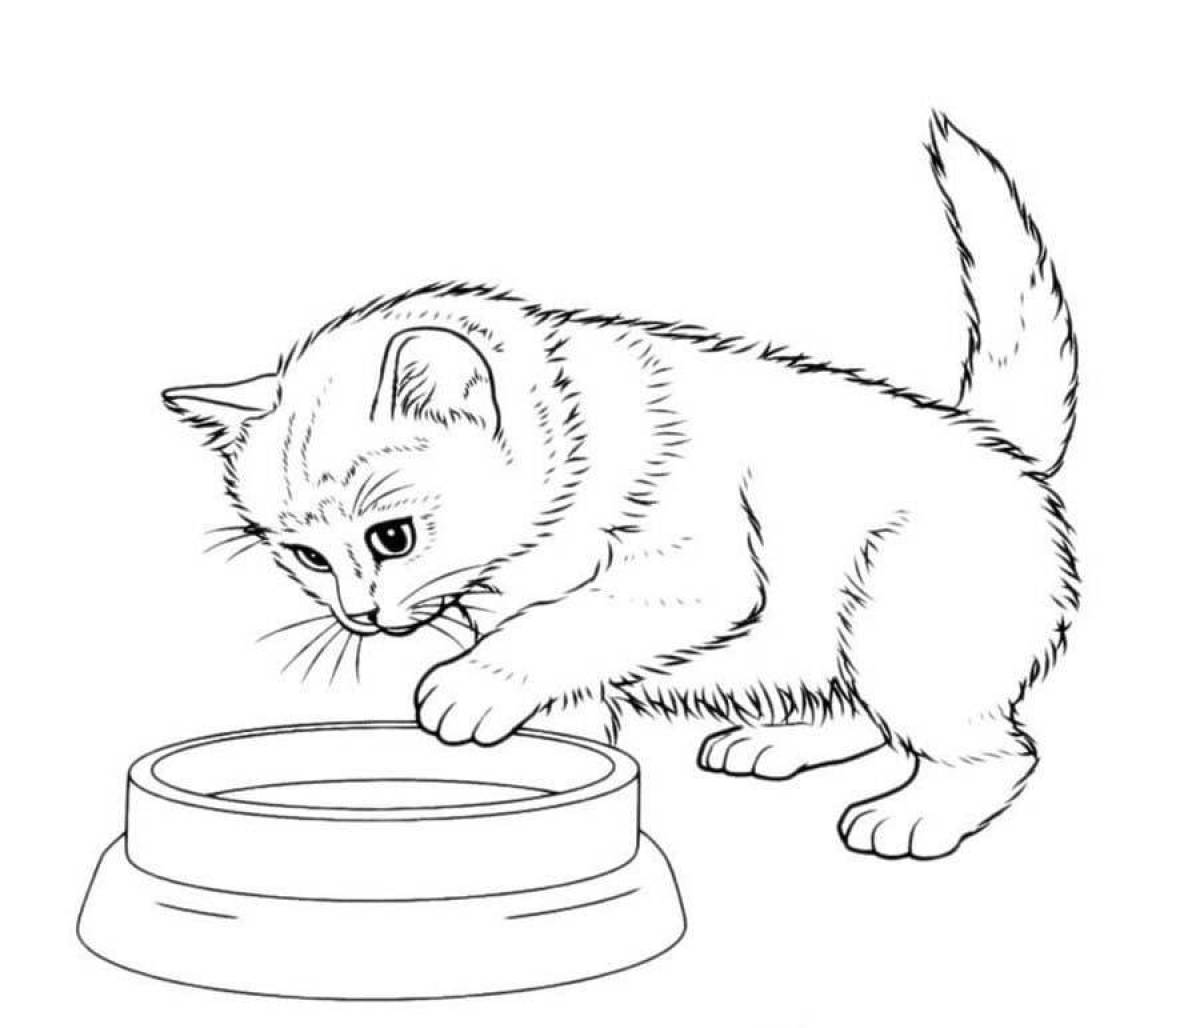 Kitty's witty coloring book